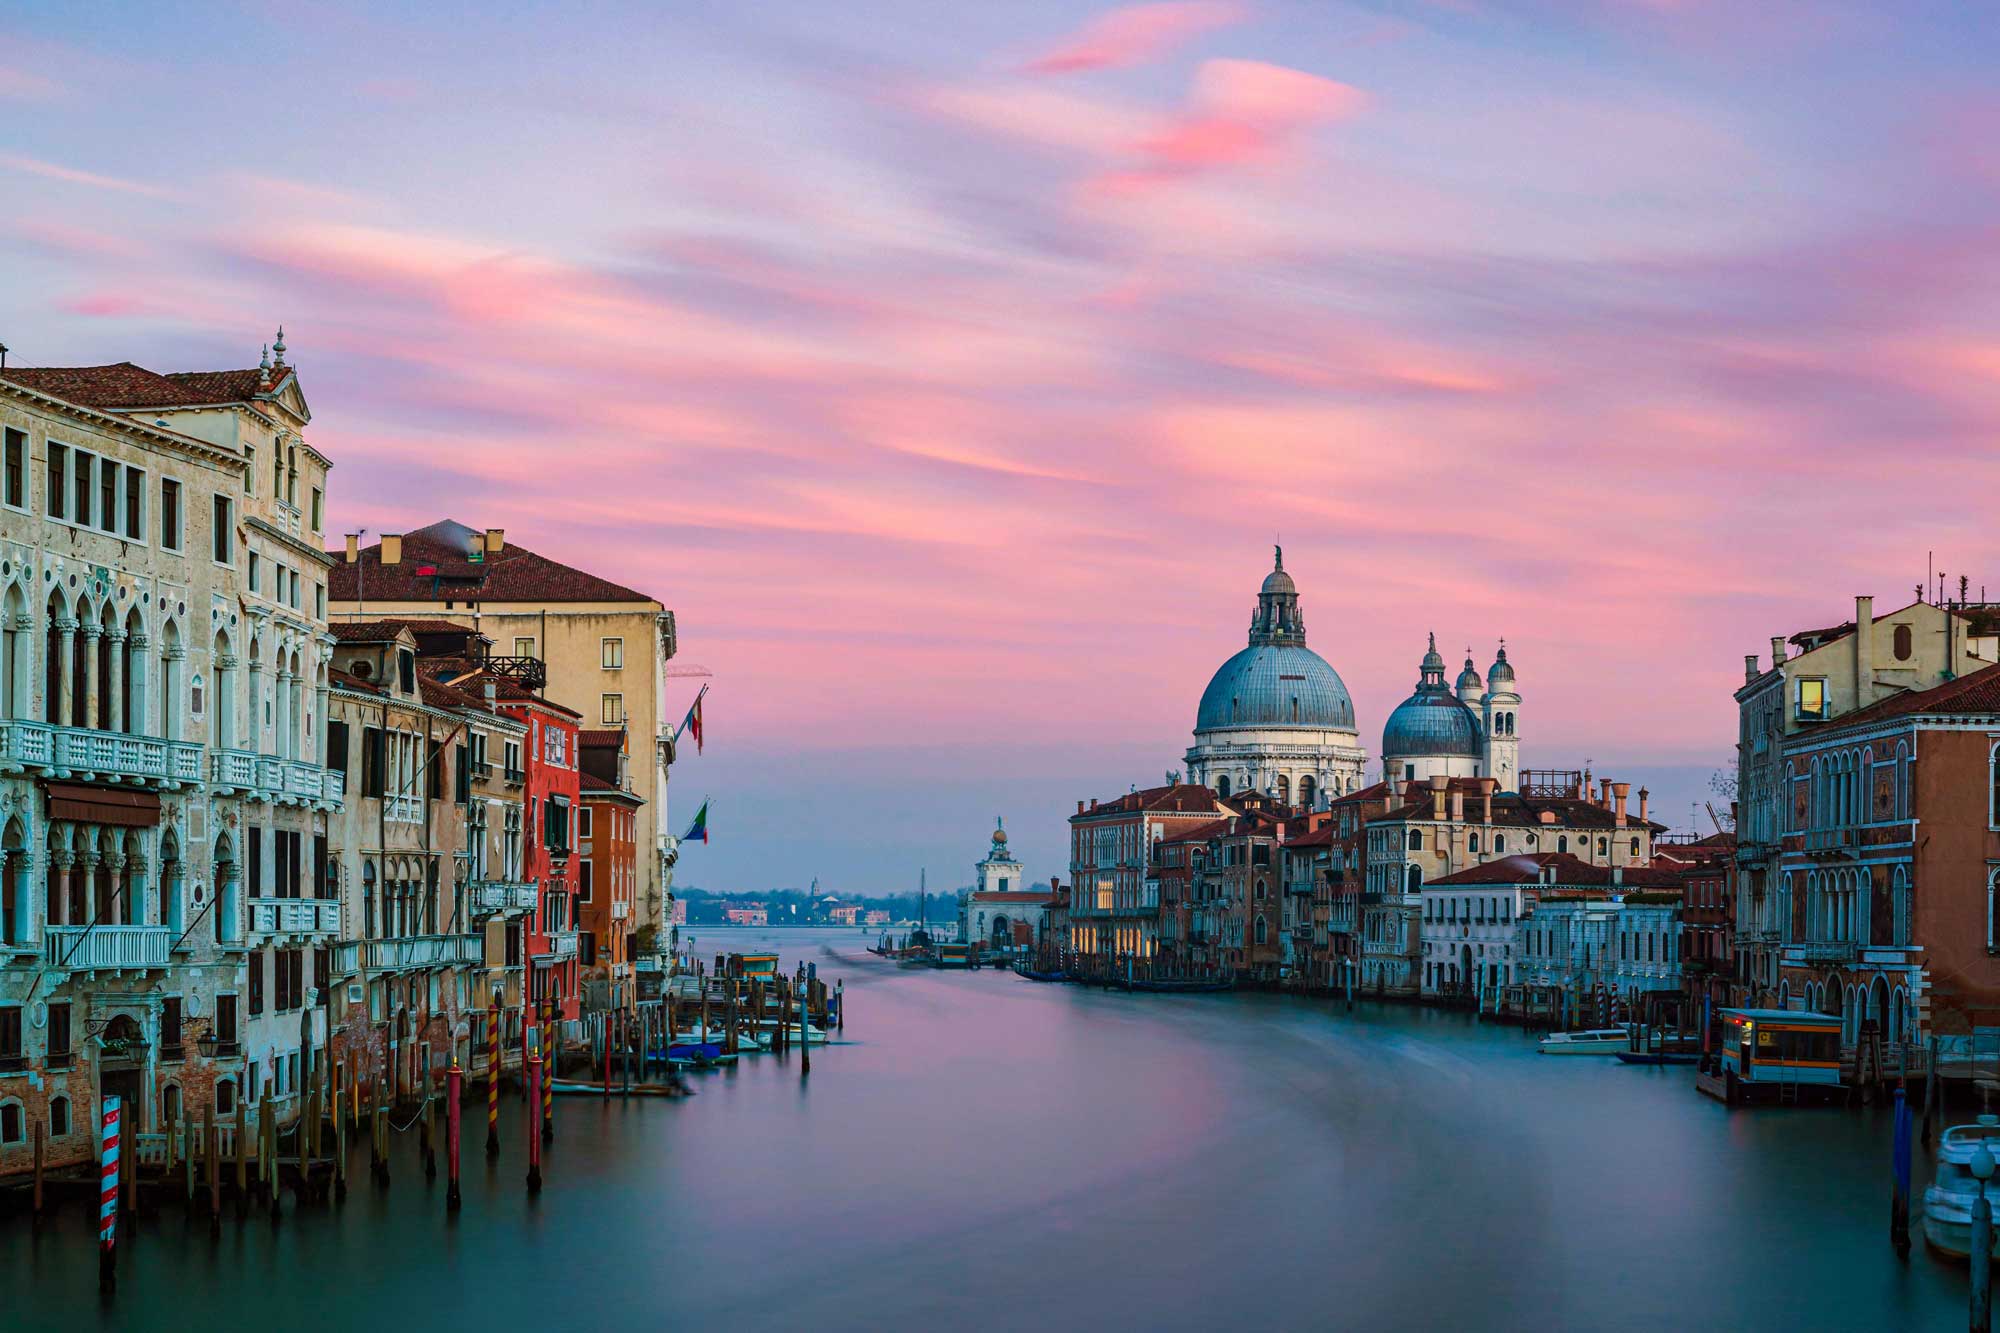 Venice…and its unique beauty all there for you to explore!